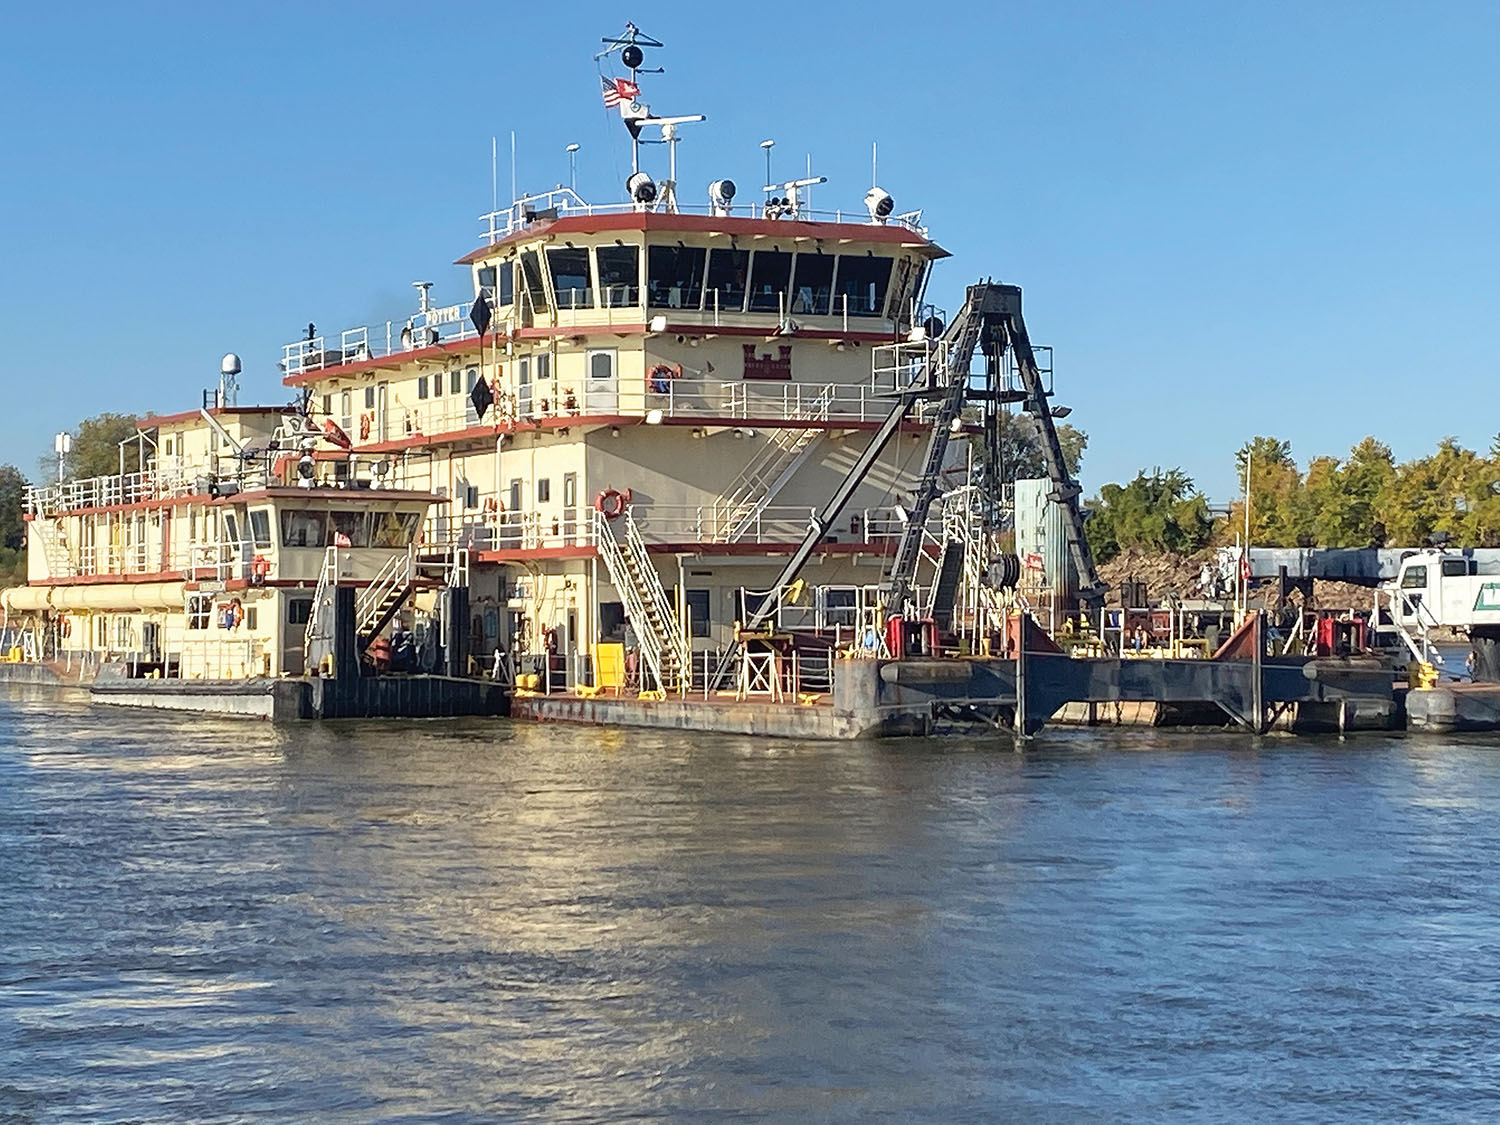 The St. Louis Engineer District’s Dredge Potter, assisted by the Kimmswick, worked 24/7 through the 2022-23 dredging season on the Mississippi River. The Potter, built in 1932, is a dustpan dredge. The Kimmswick, commissioned in 2006, assists the dredge with pipeline movements. (photo by Janet Meredith/St. Louis Engineer District)